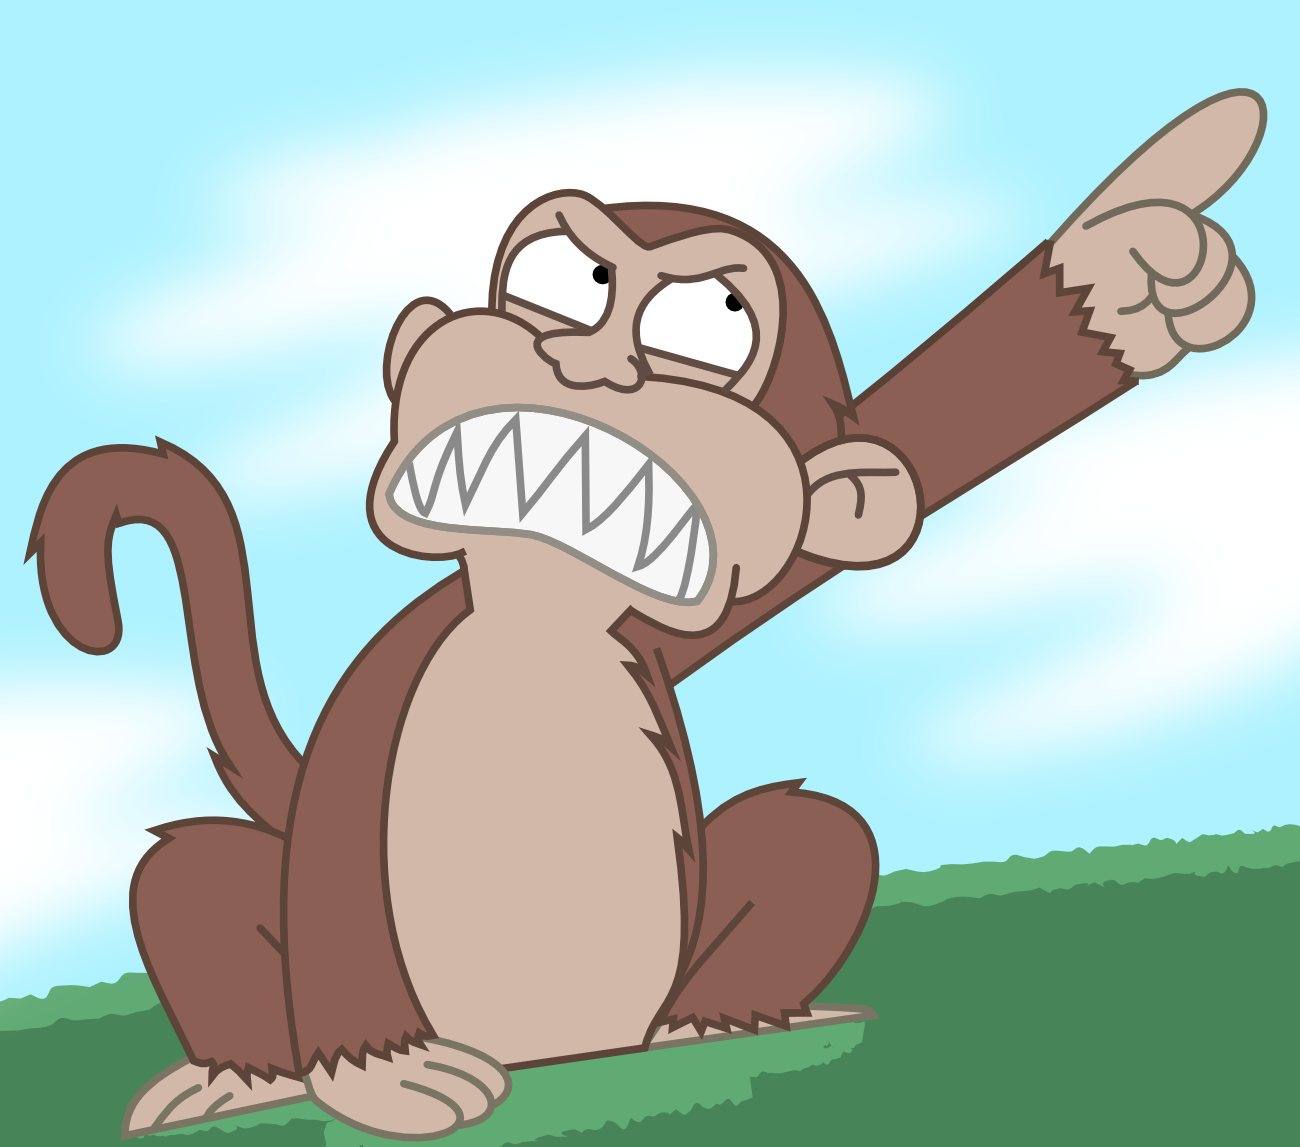 Free download Angry Monkey Family Guy Evil monkeyby lonmcgregor